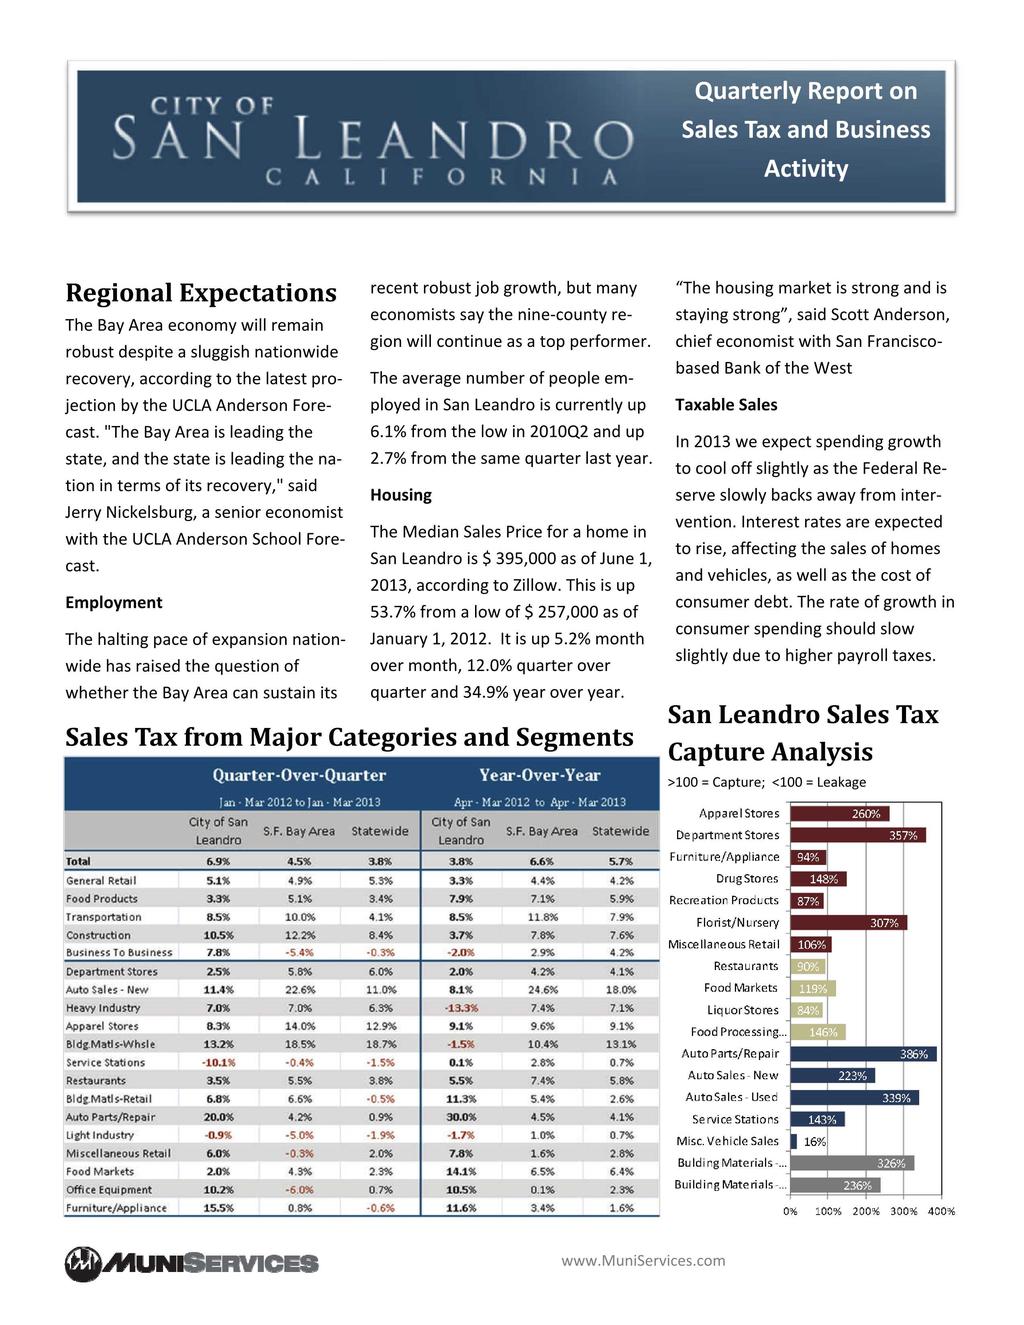 Quarterly Report on Sales Tax and Business Activity Regional Expectations The Bay Area economy will remain robust despite a sluggish nationwide recovery, according to the latest pro jection by the